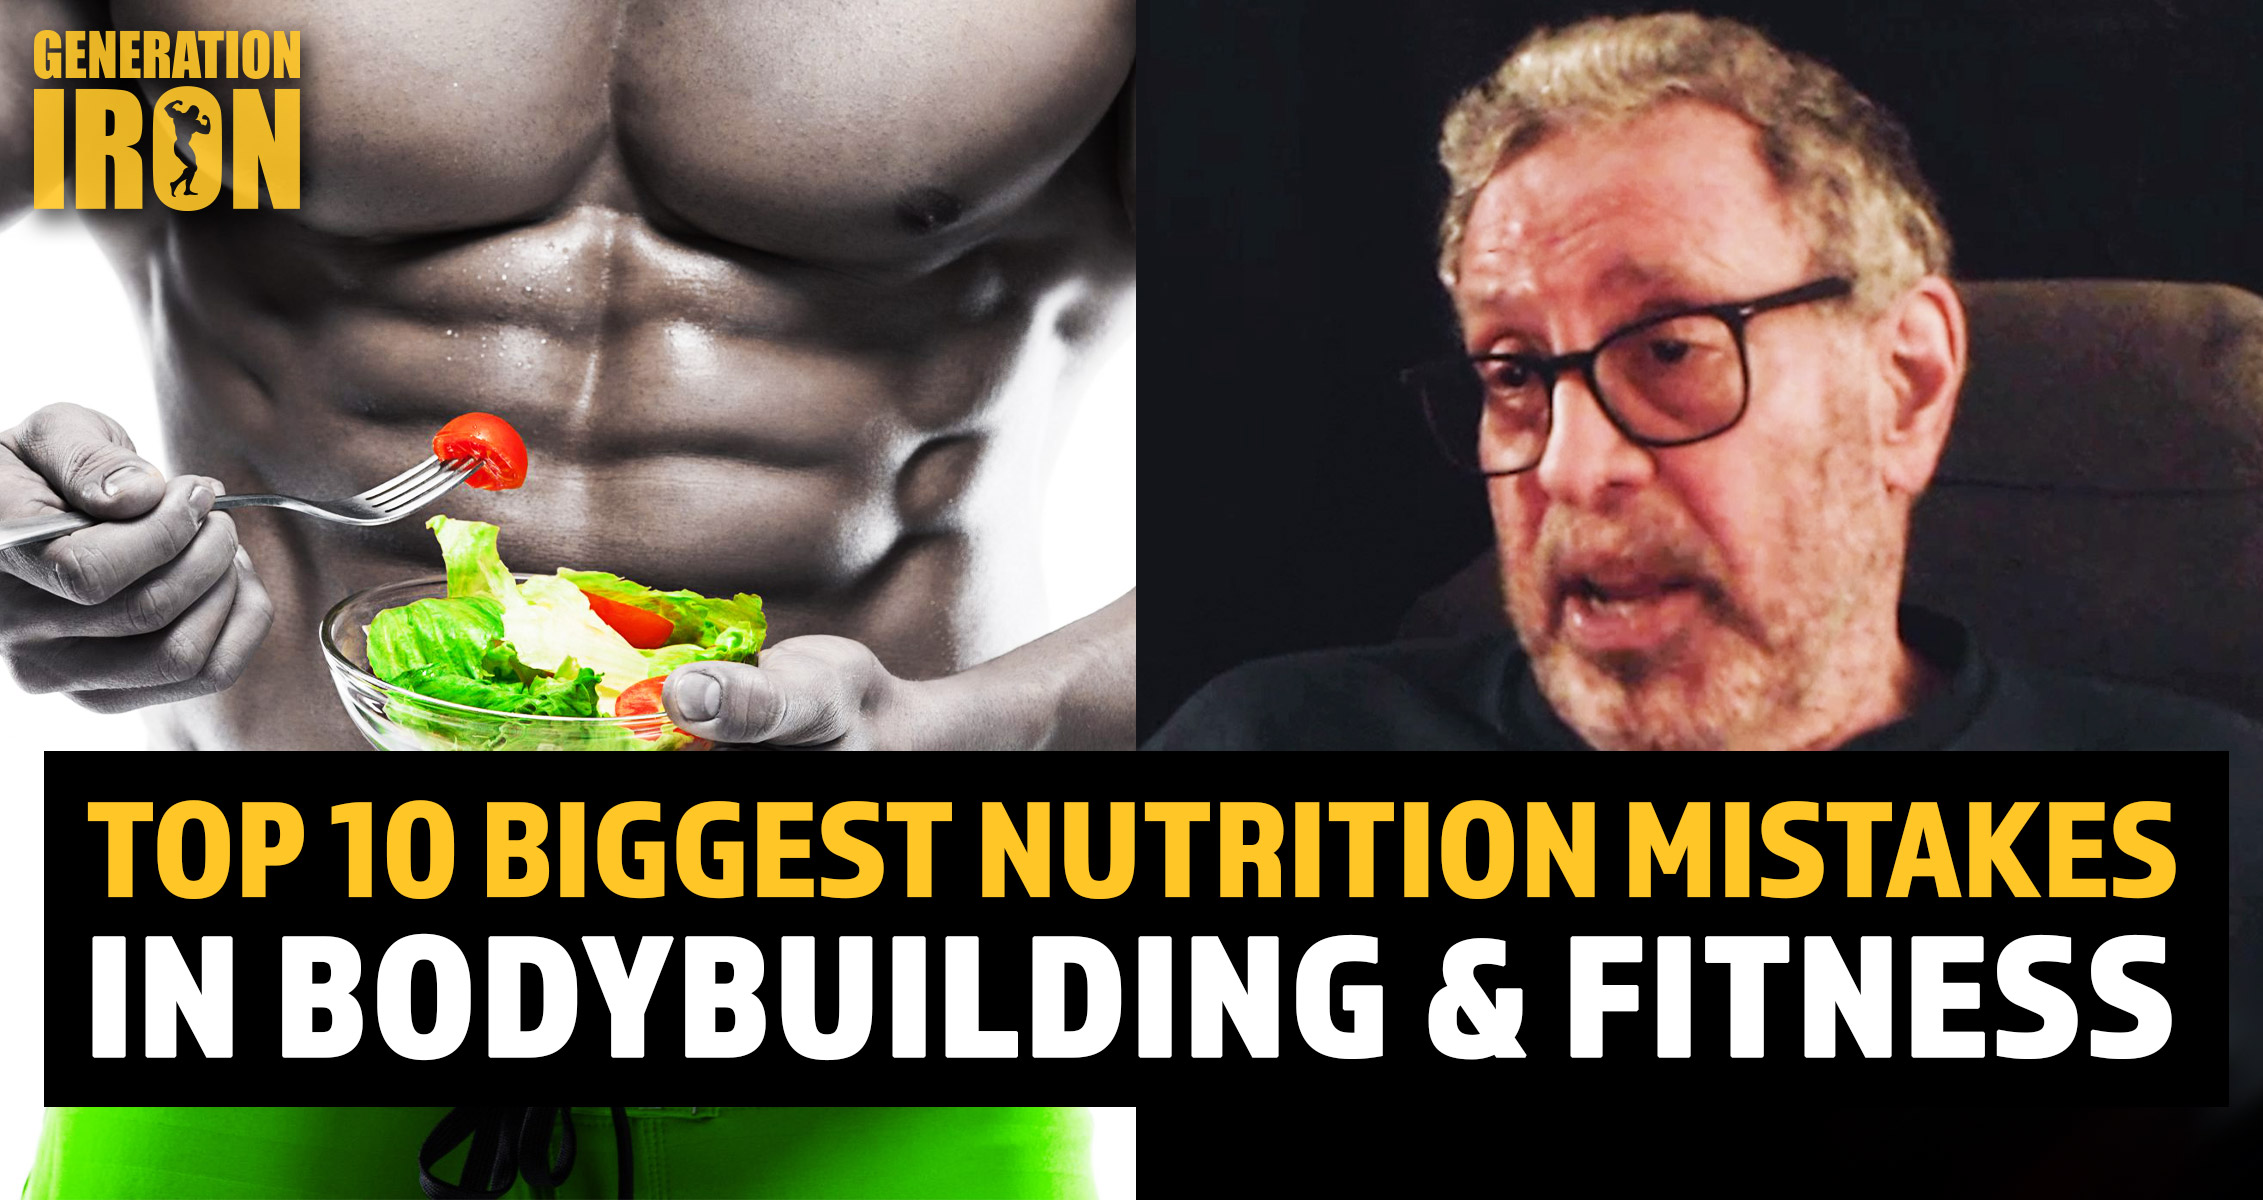 Straight Facts: The Top 10 Biggest Nutrition Mistakes In Bodybuilding & Fitness